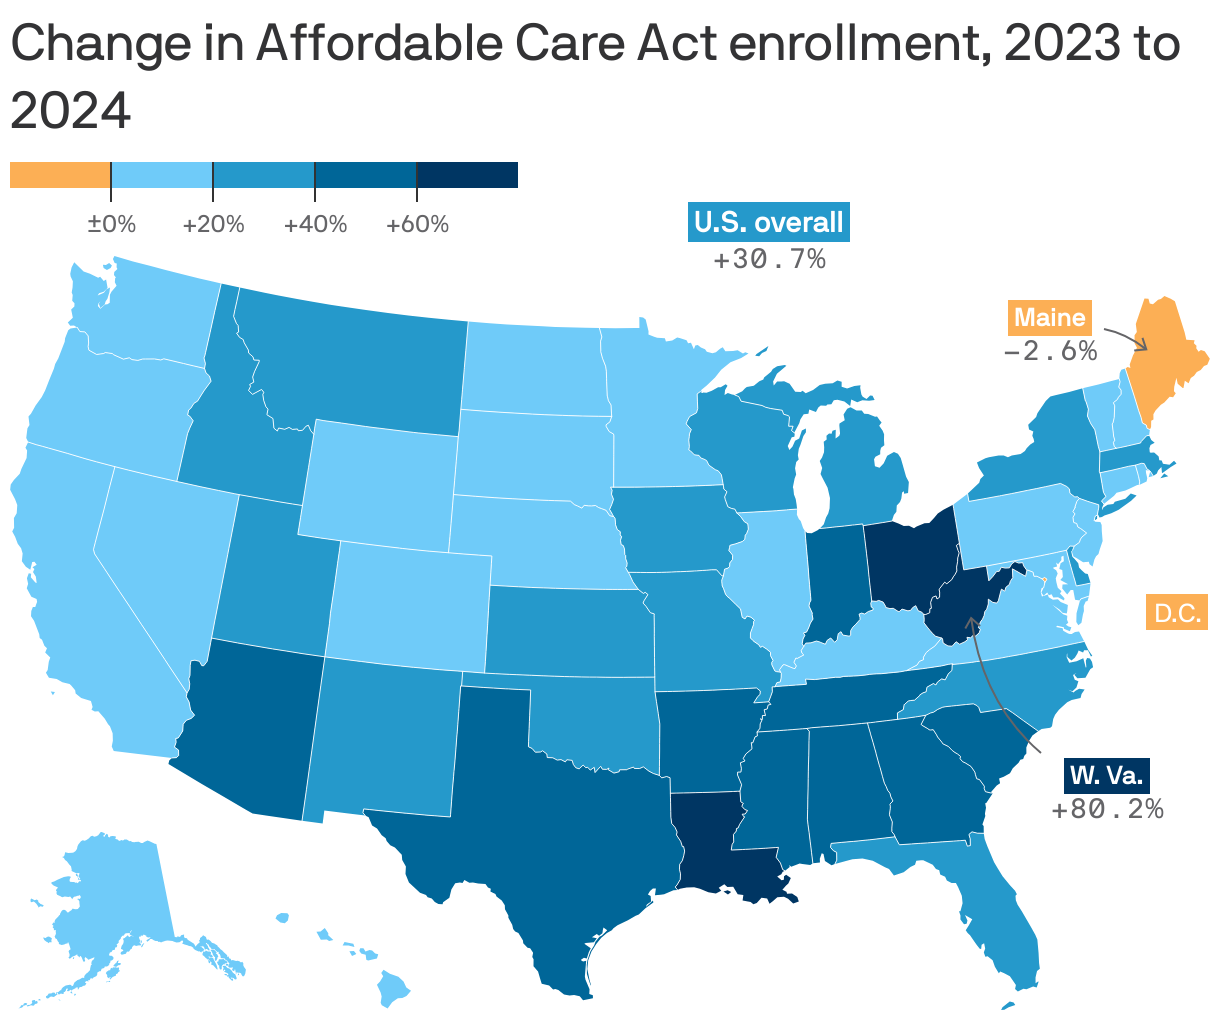 Change in Affordable Care Act enrollment, 2023 to 2024